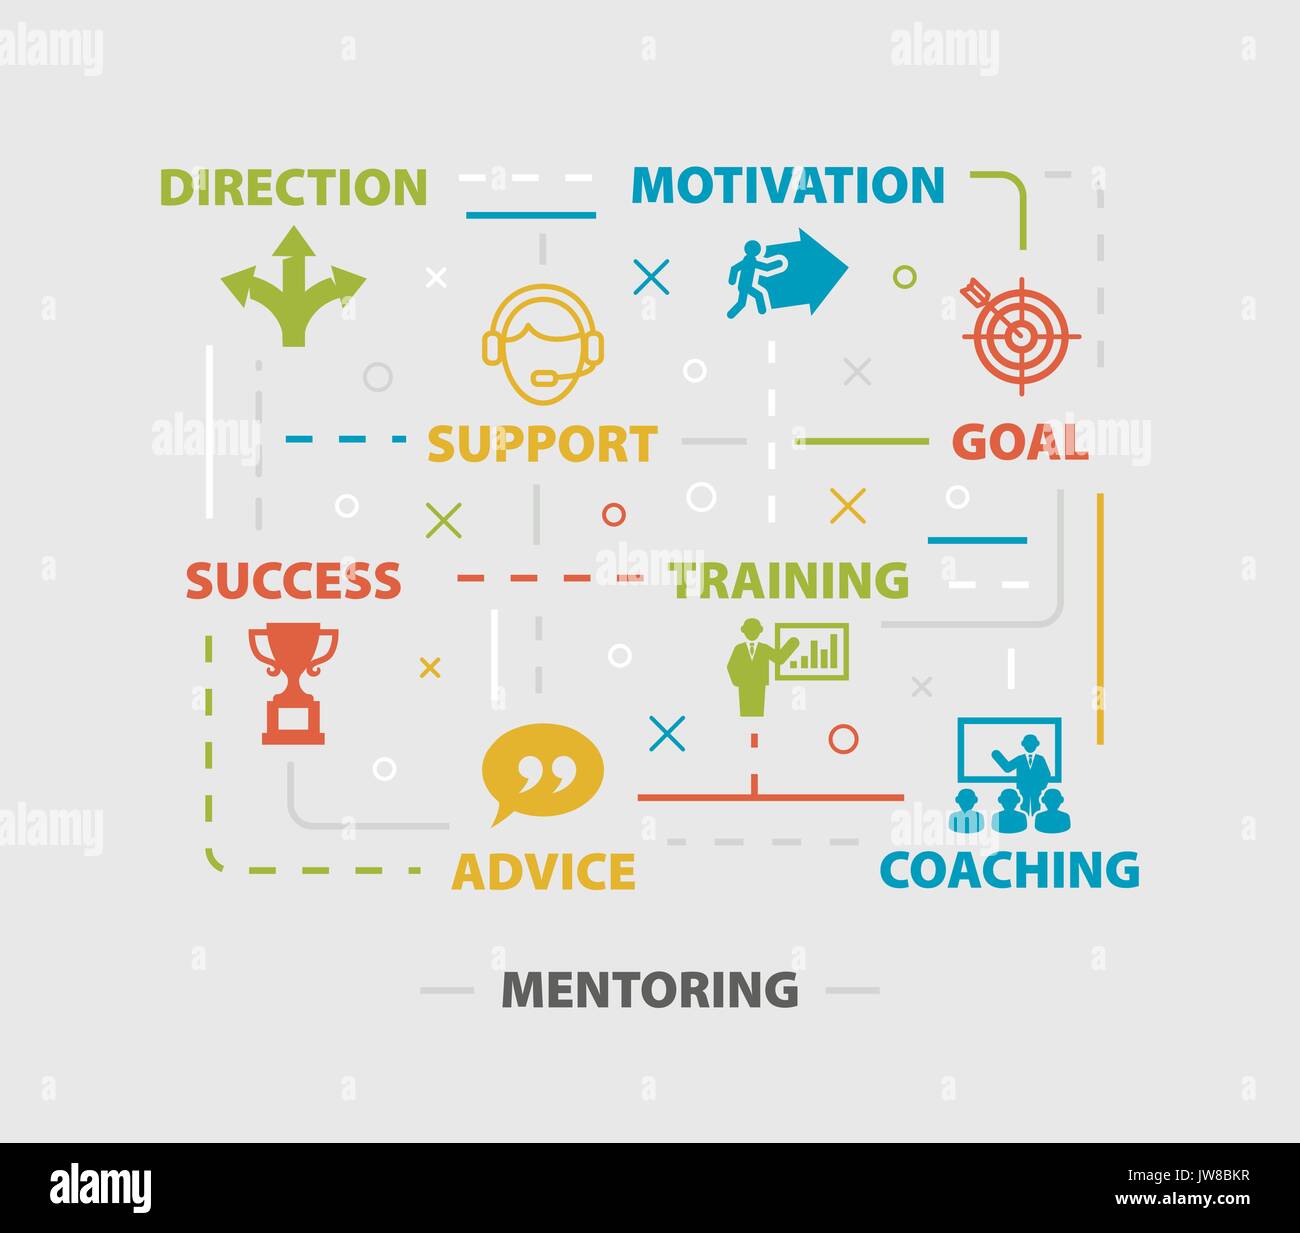 MENTORING Concept with icons Stock Vector